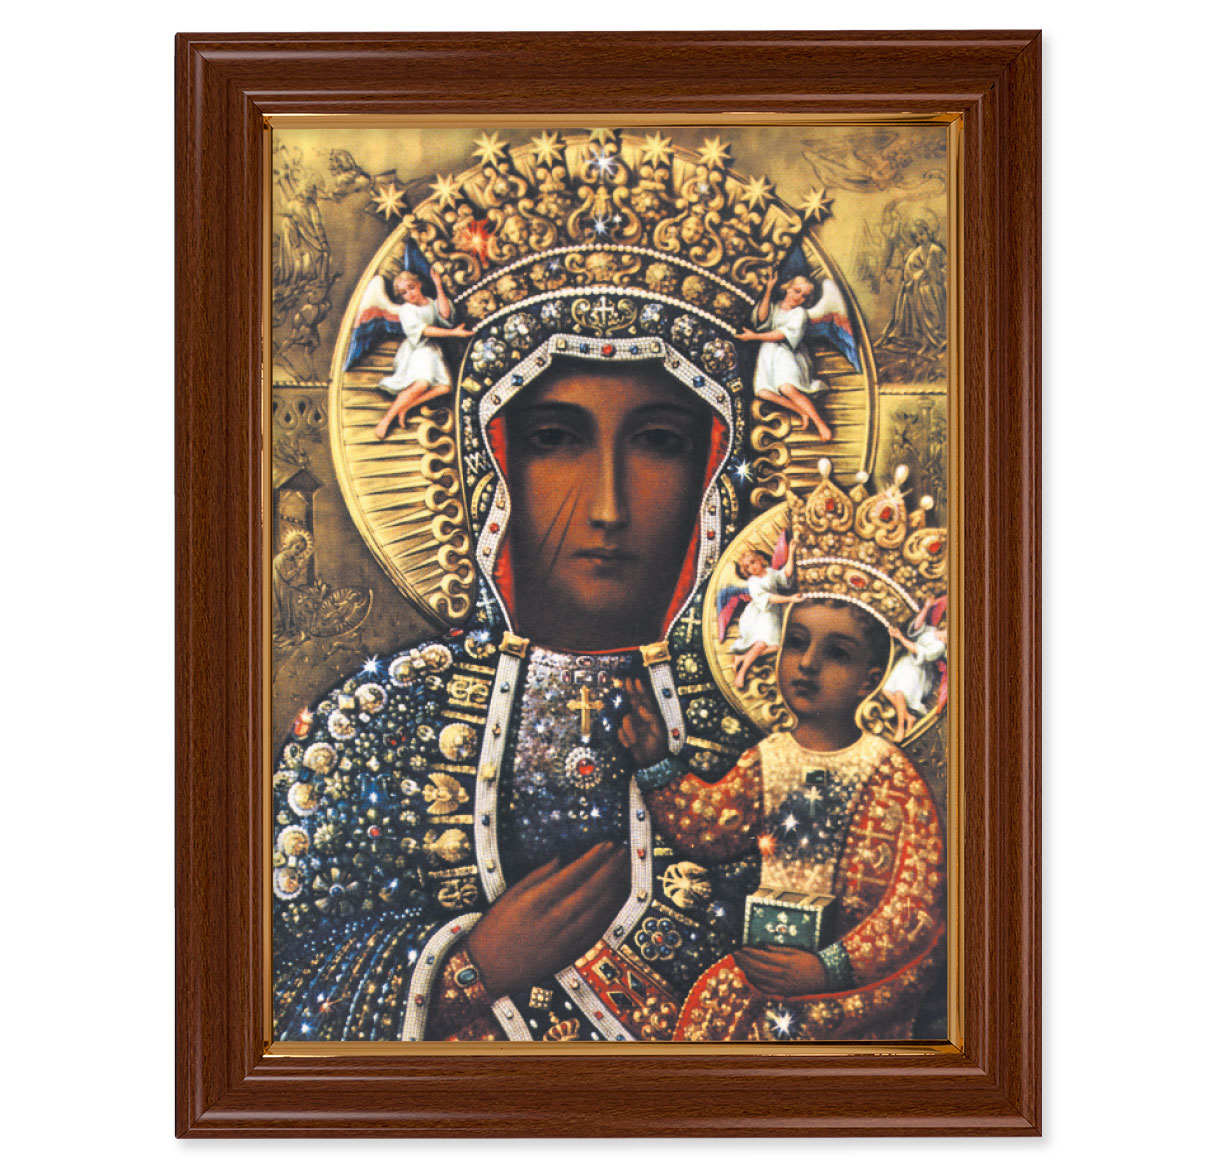 Our Lady of Czestochowa Picture Framed Wall Art Decor, Extra Large, Traditional Dark Walnut Finished Frame with Thin Gold Lip